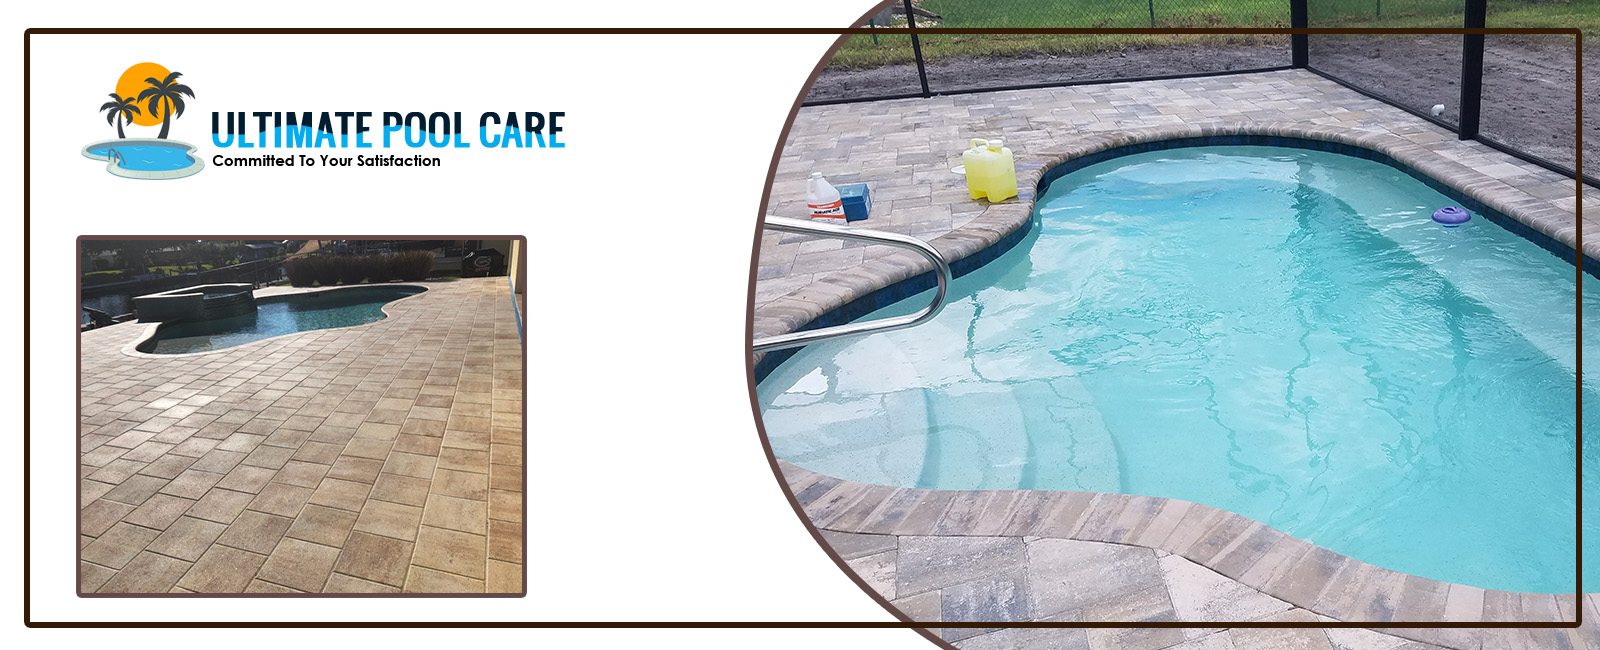 jacuzzi-and-outdoor-inground-swimming-pool-with-clean-sealed-pavers